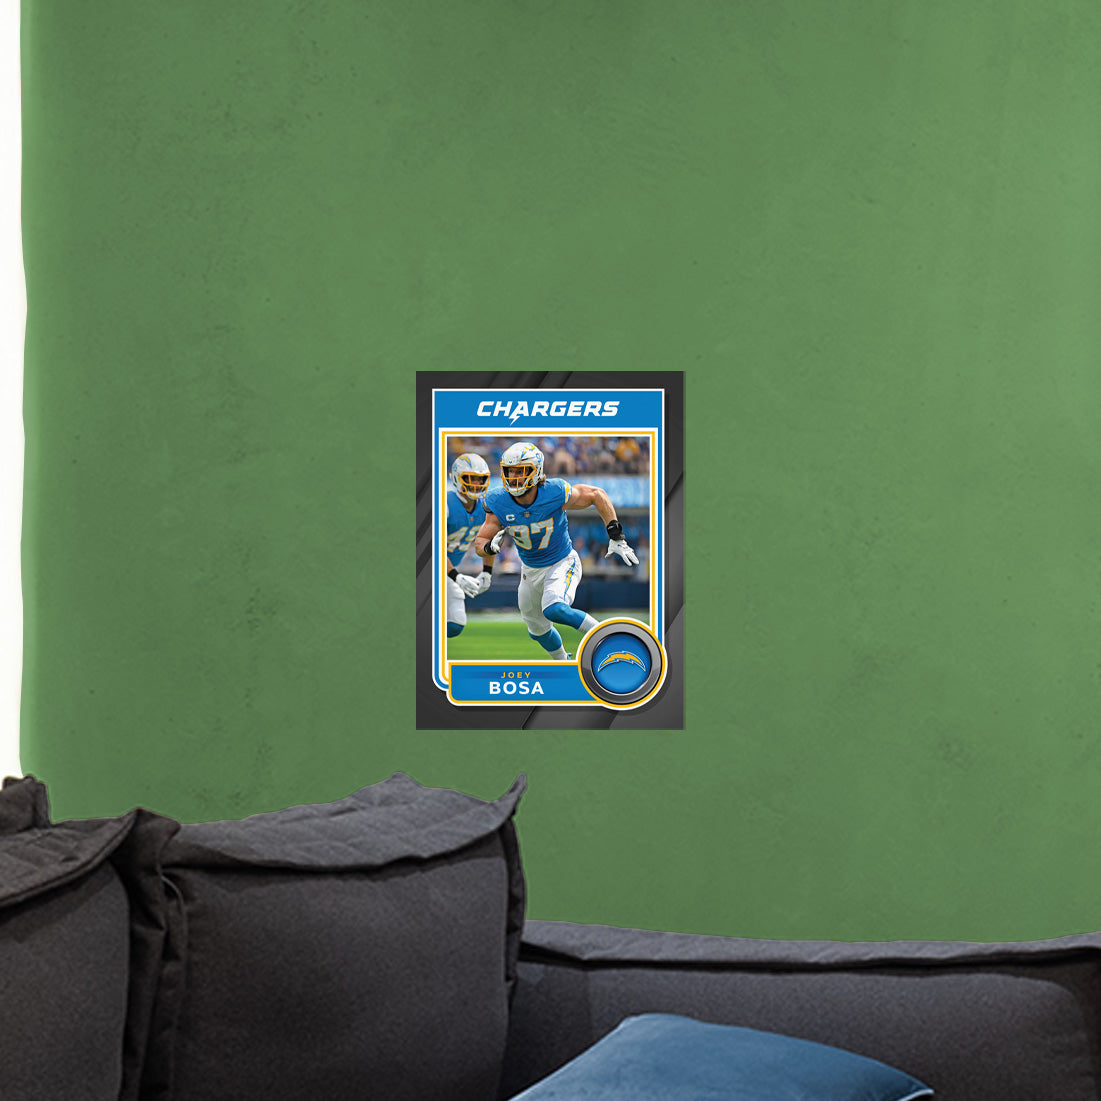 Los Angeles Chargers: Joey Bosa Poster - Officially Licensed NFL Removable Adhesive Decal